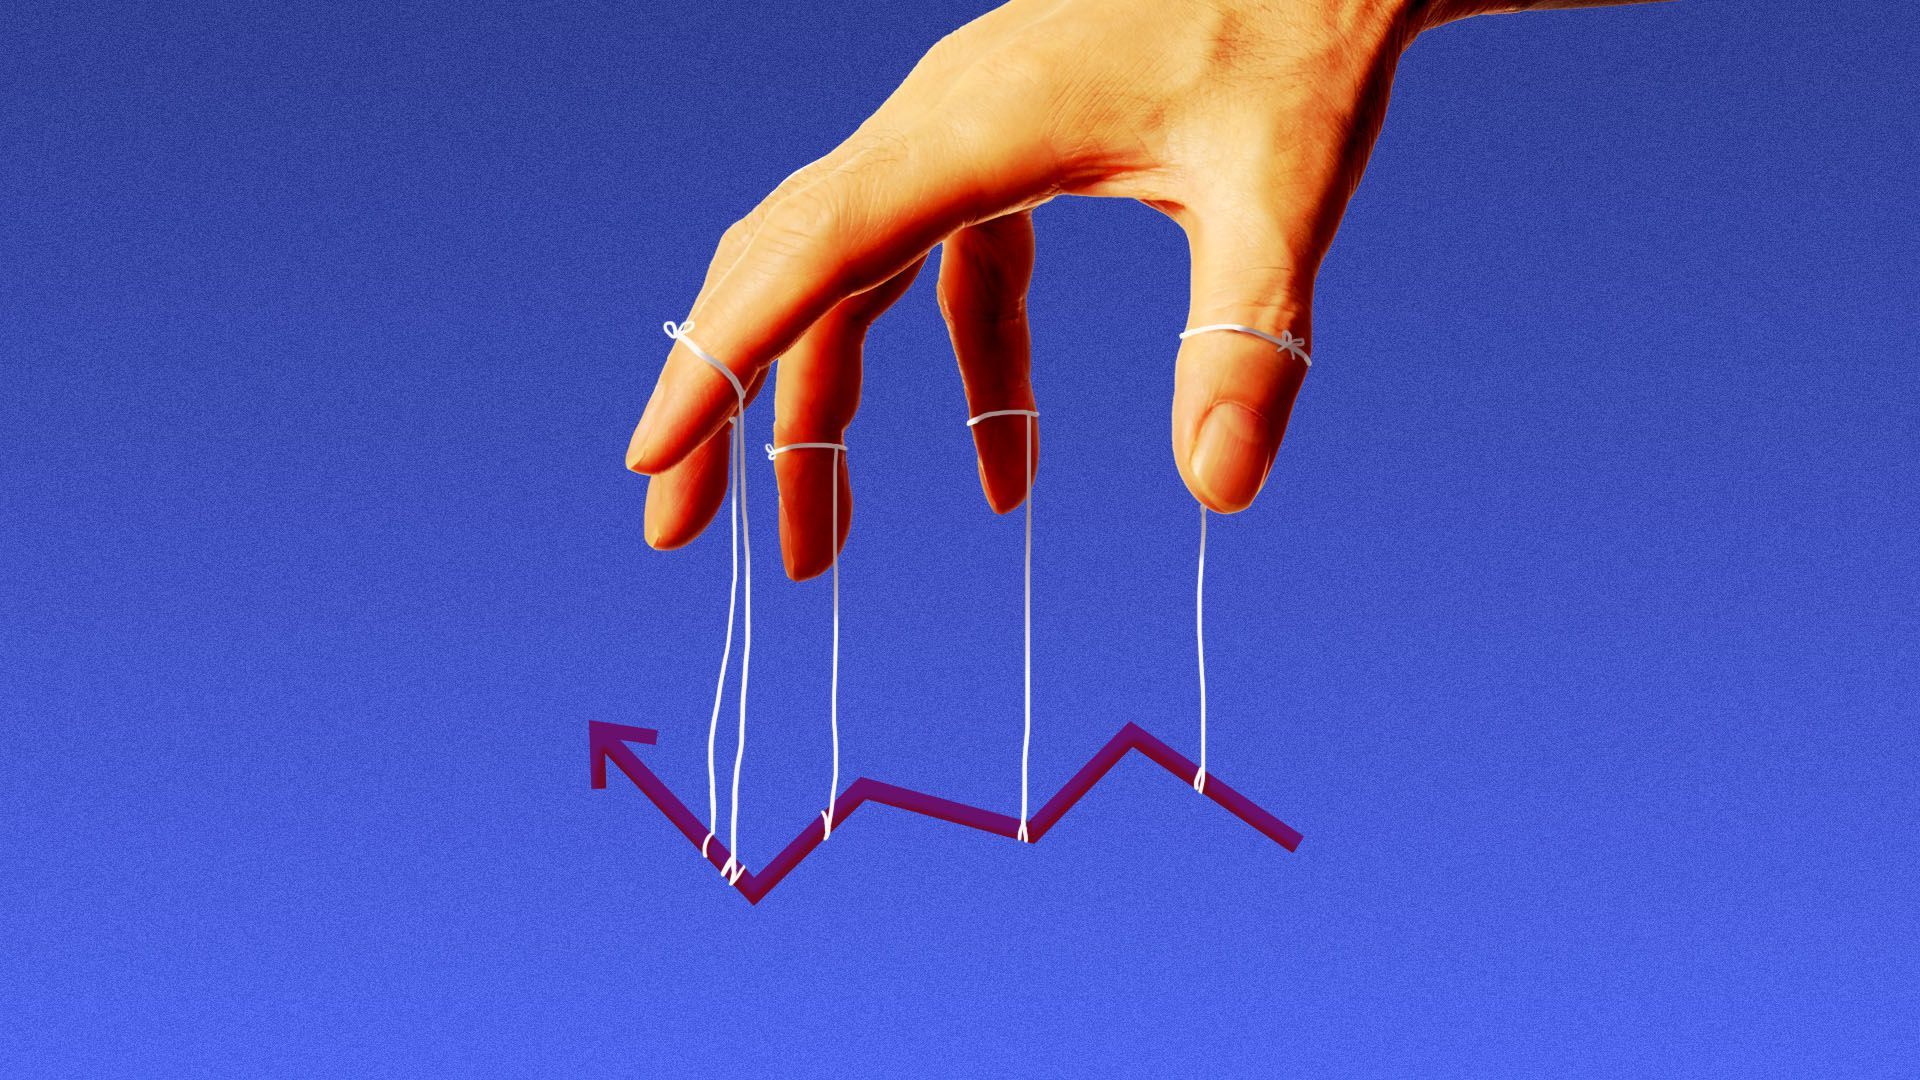 llustration of a hand with strings tied to the fingers, manipulating a market trend line.